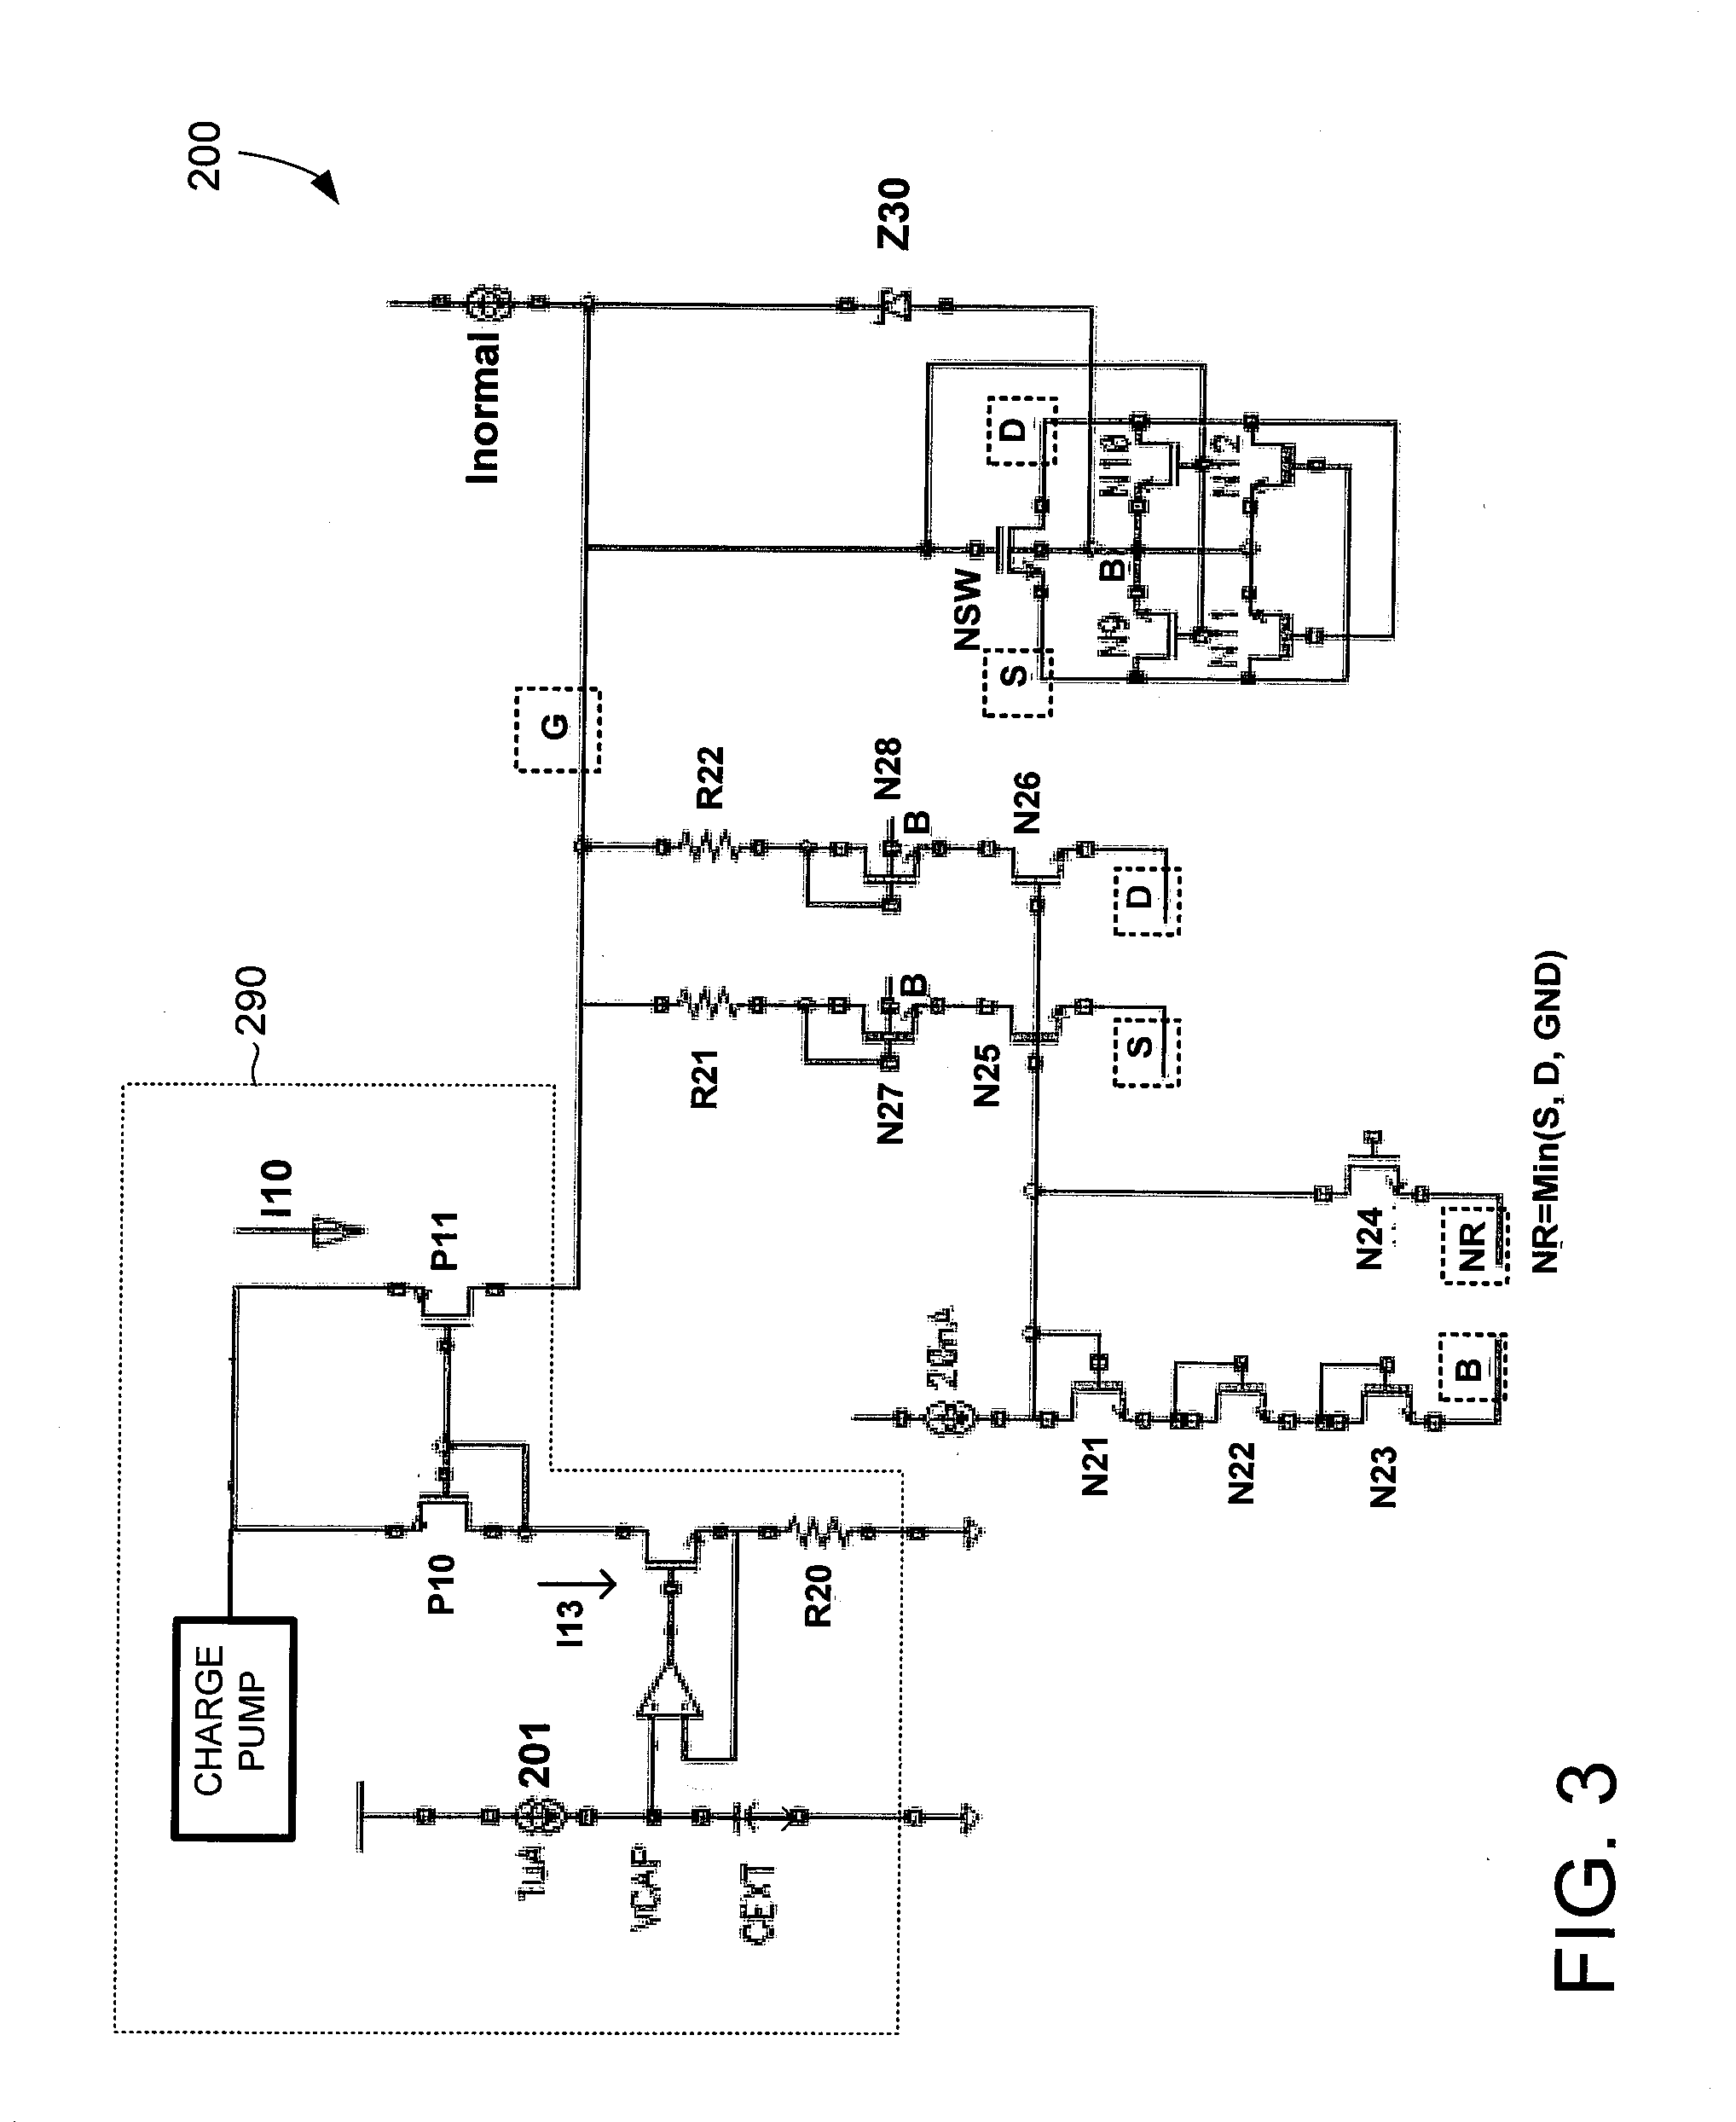 Audio switch circuit with slow turn-on